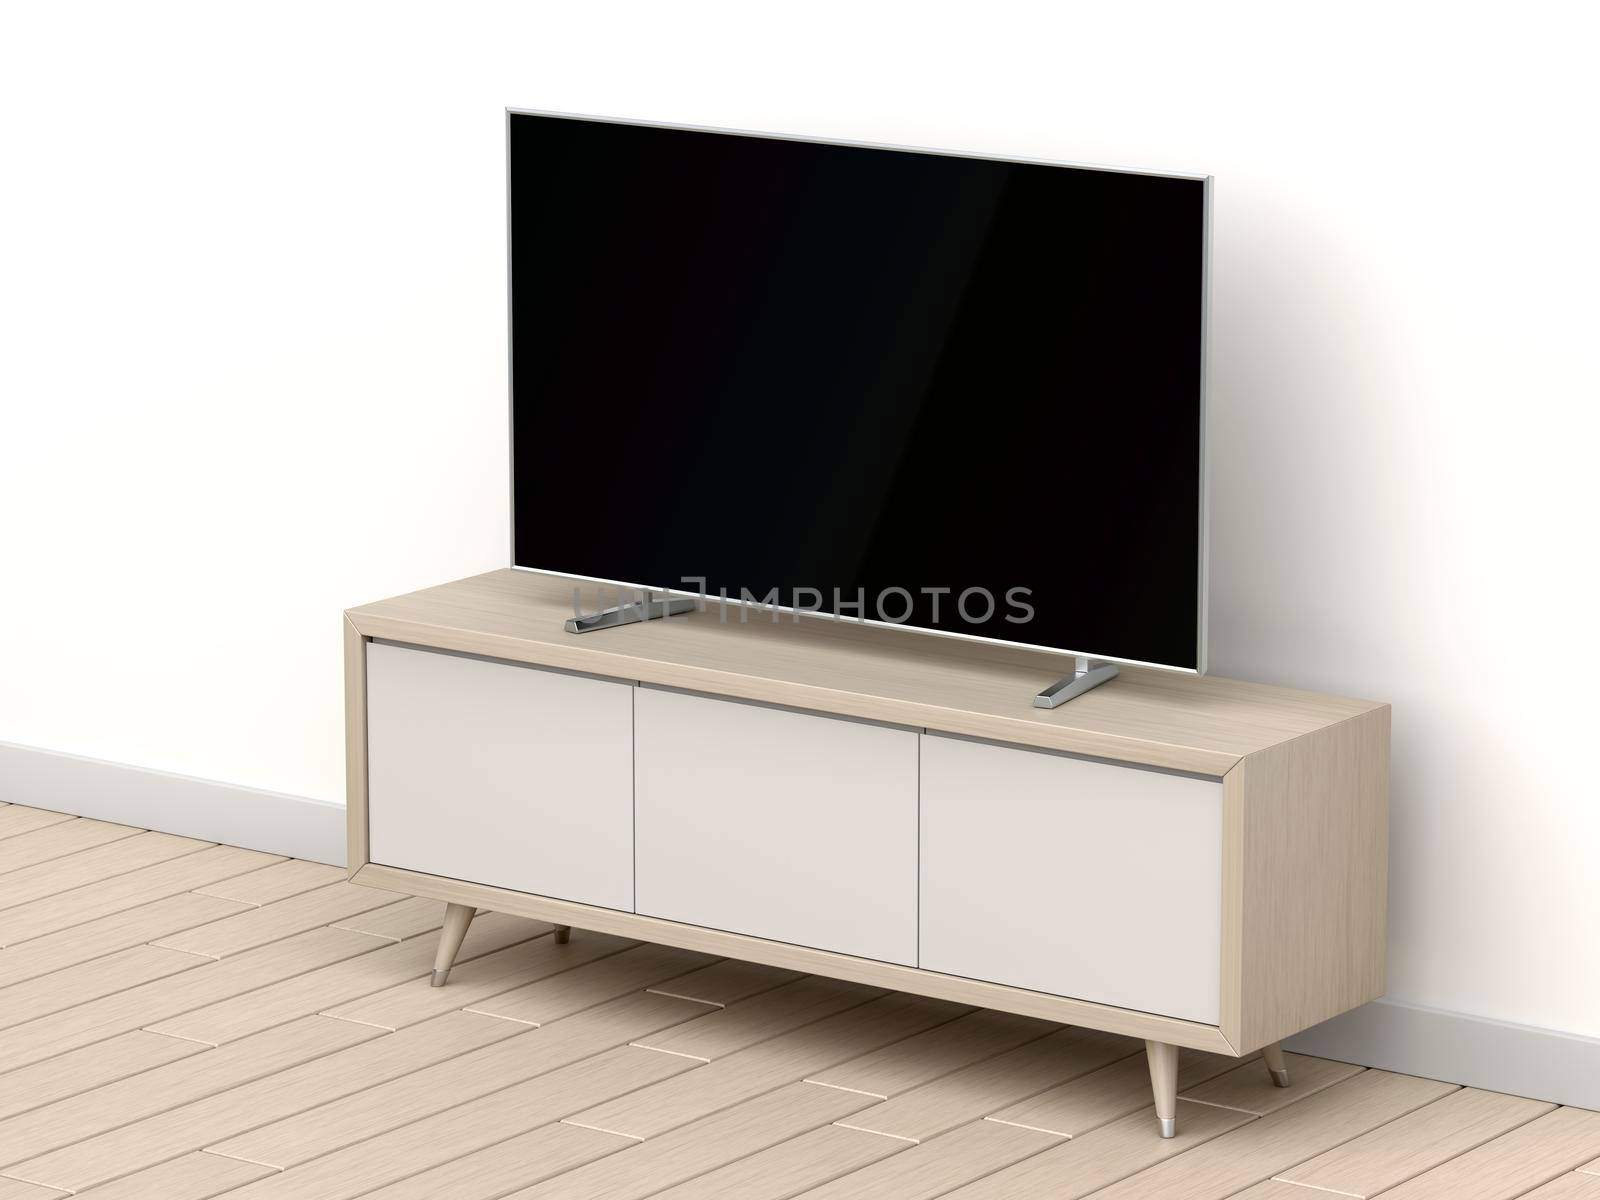 Flat screen tv on modern tv stand in the living room 